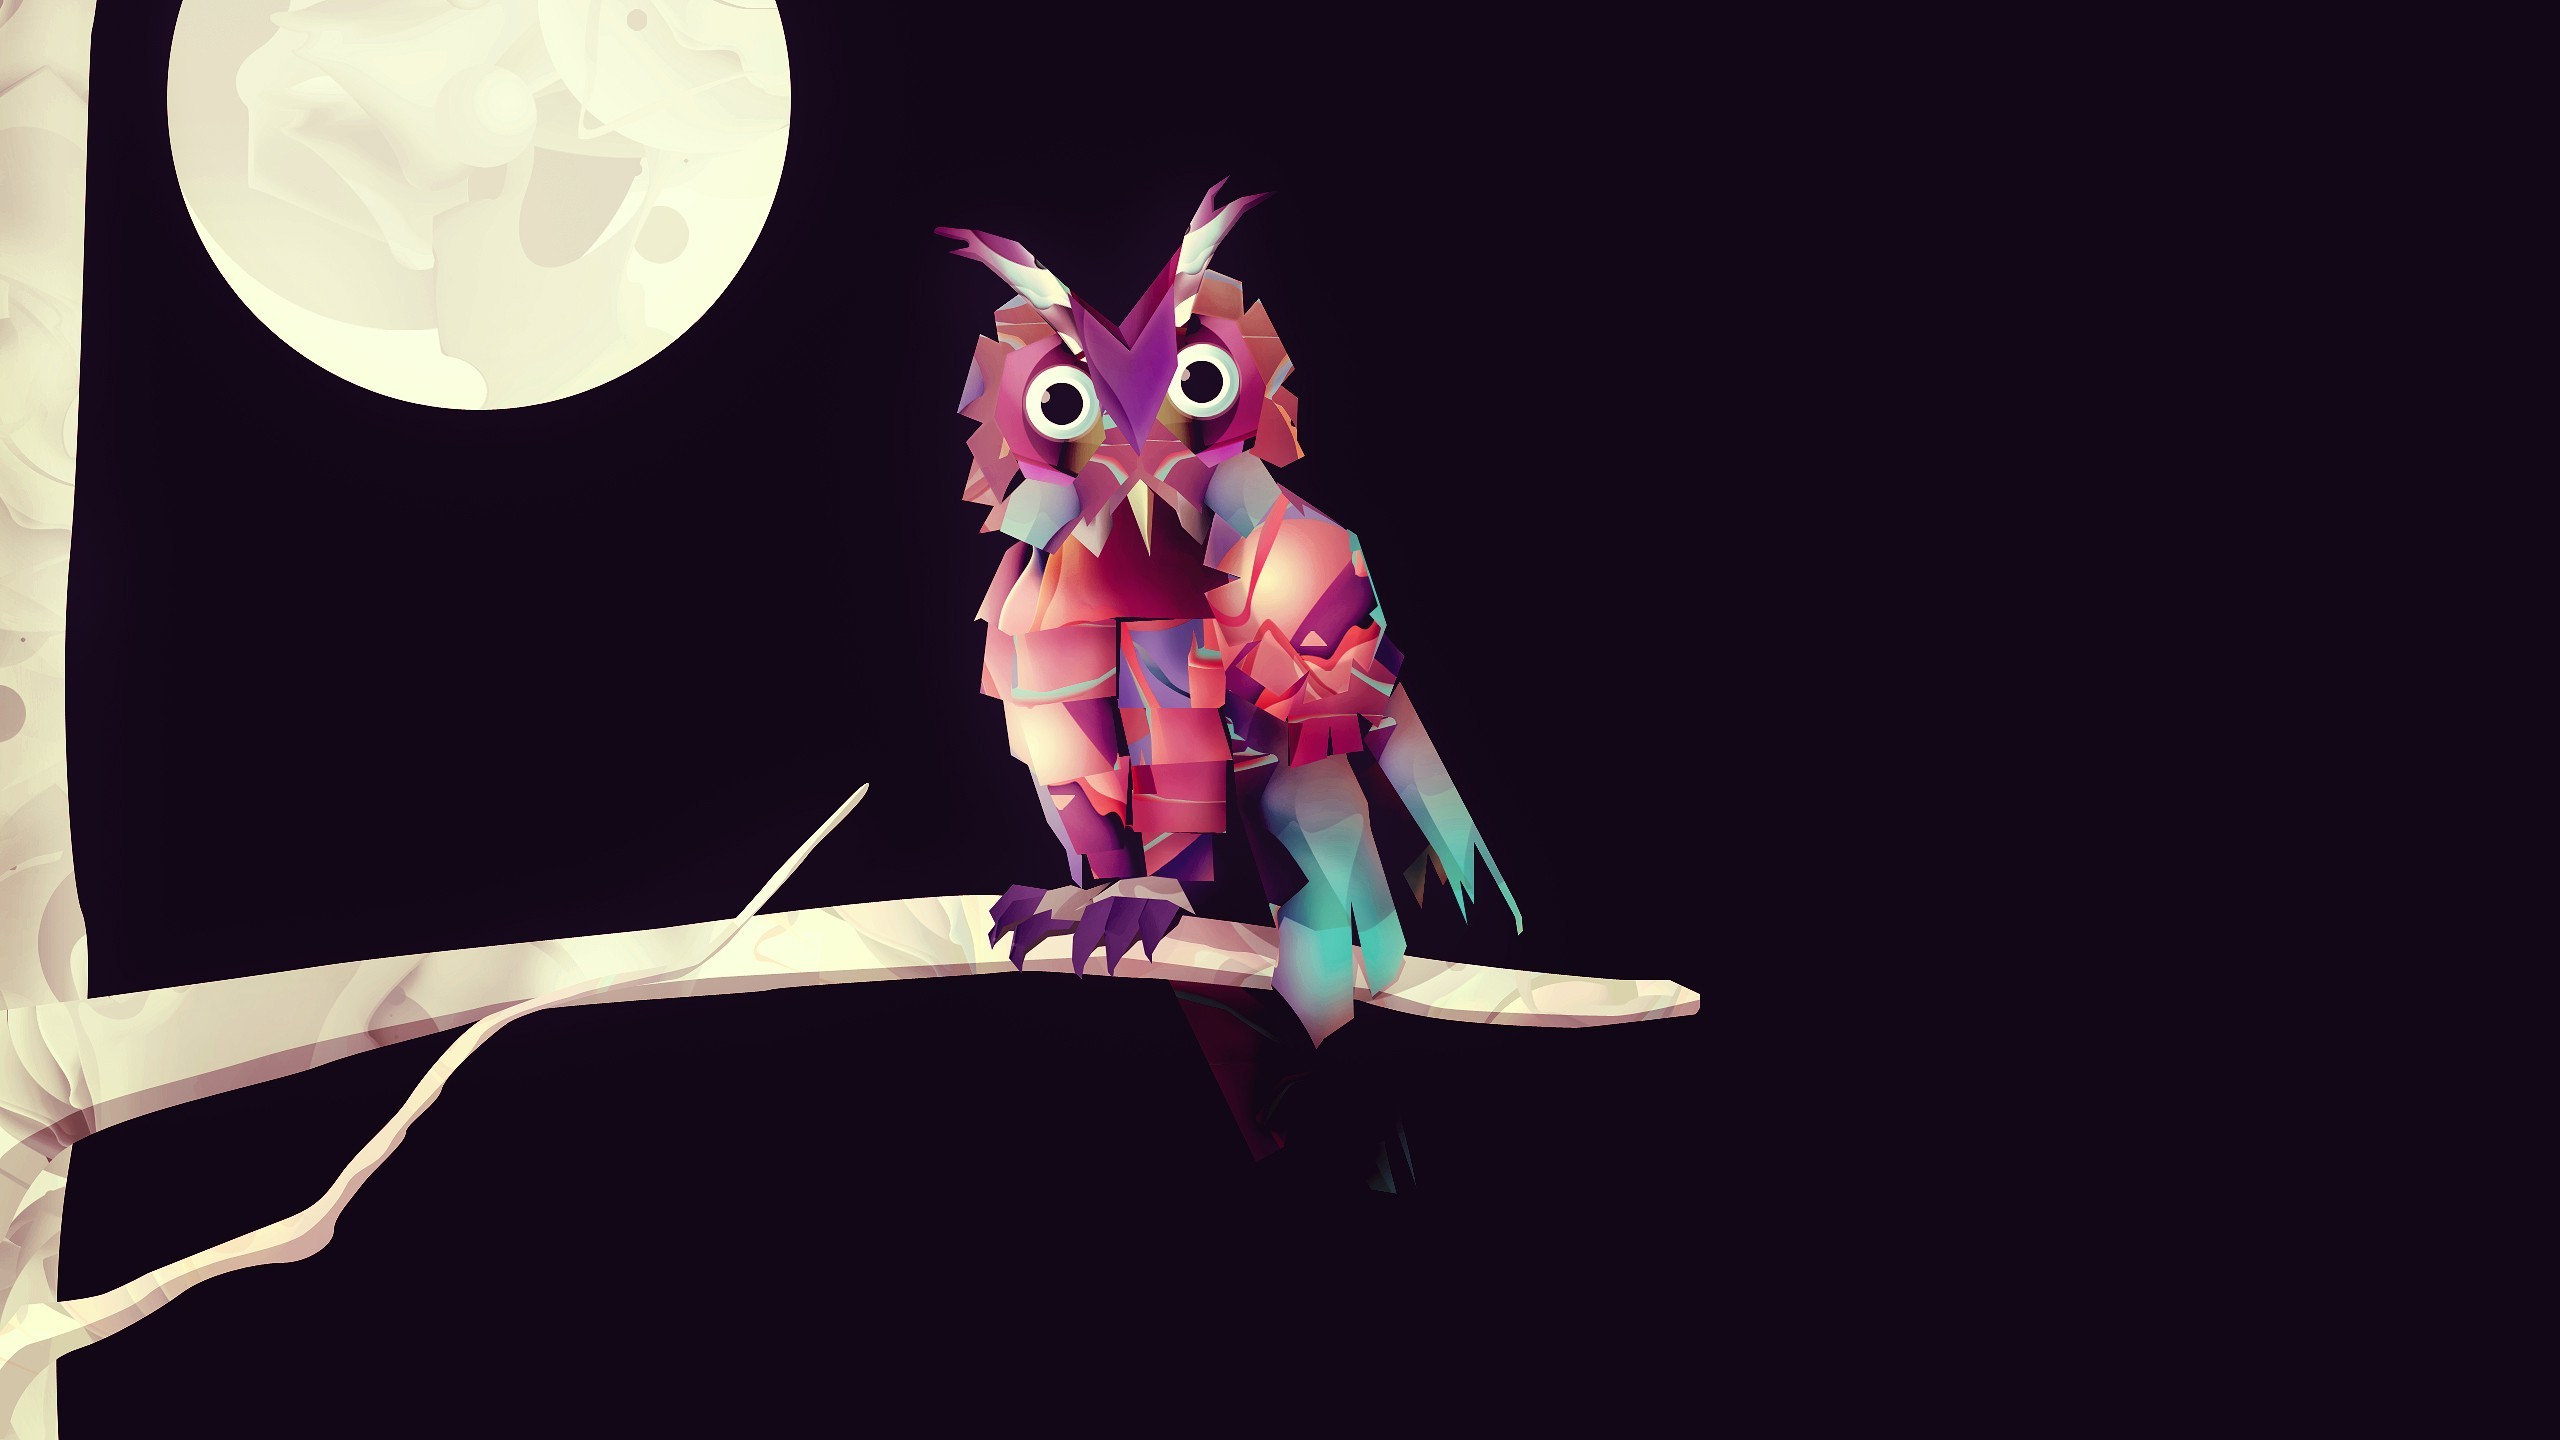 animals birds owl night moon trees branch low poly simple background Wallpaper